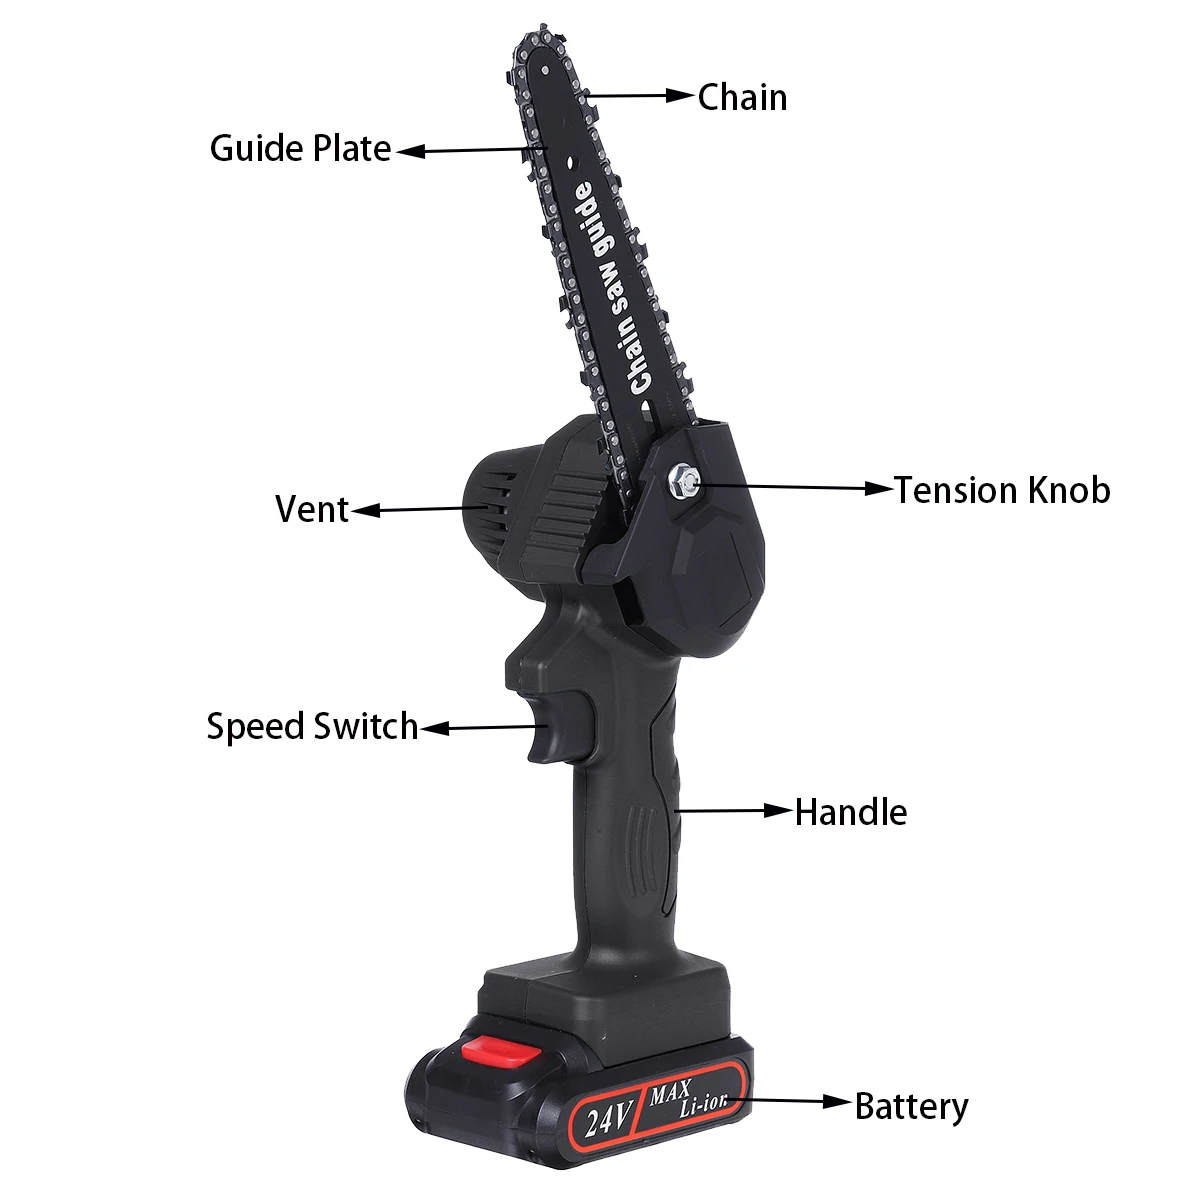 6 Inch 3000W Electric Chain Saw Pruning ChainSaw Cordless Garden Tree Logging Trimming Saw Woodworking Cutter Tool Kits